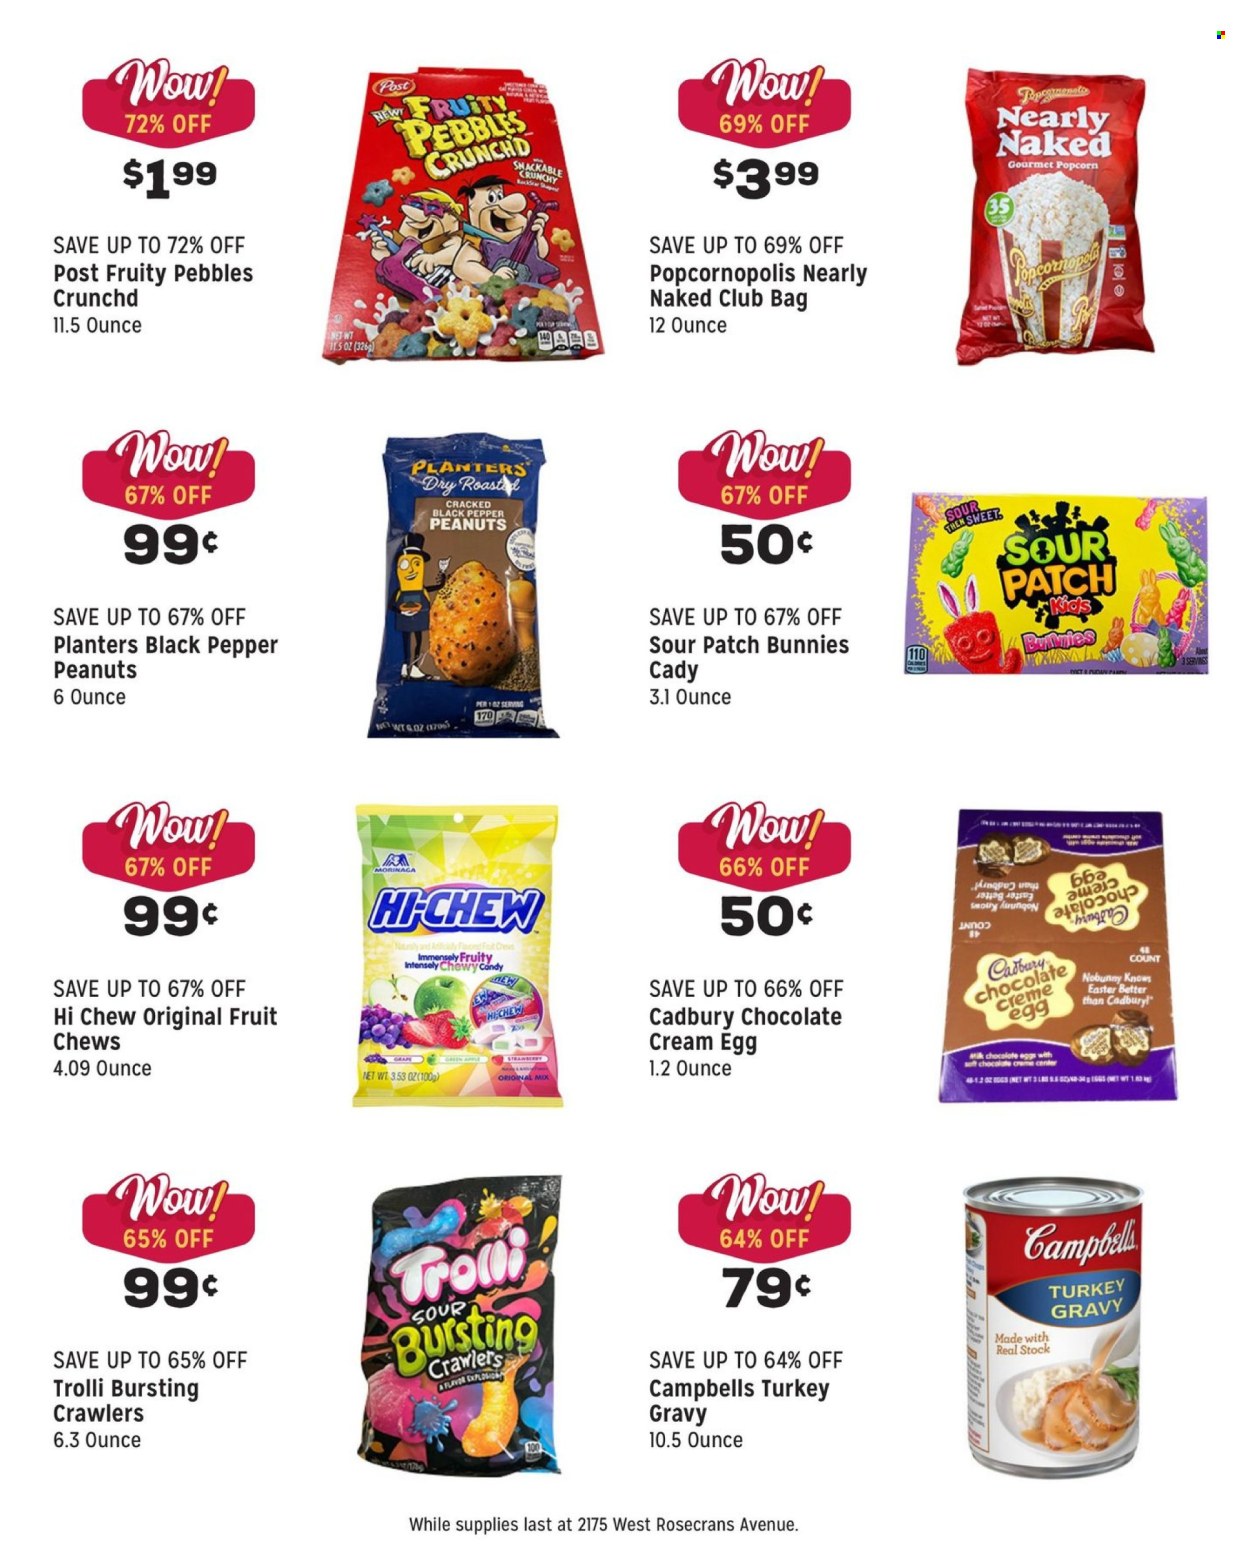 Grocery Outlet ad  - 04.17.2024 - 04.23.2024.